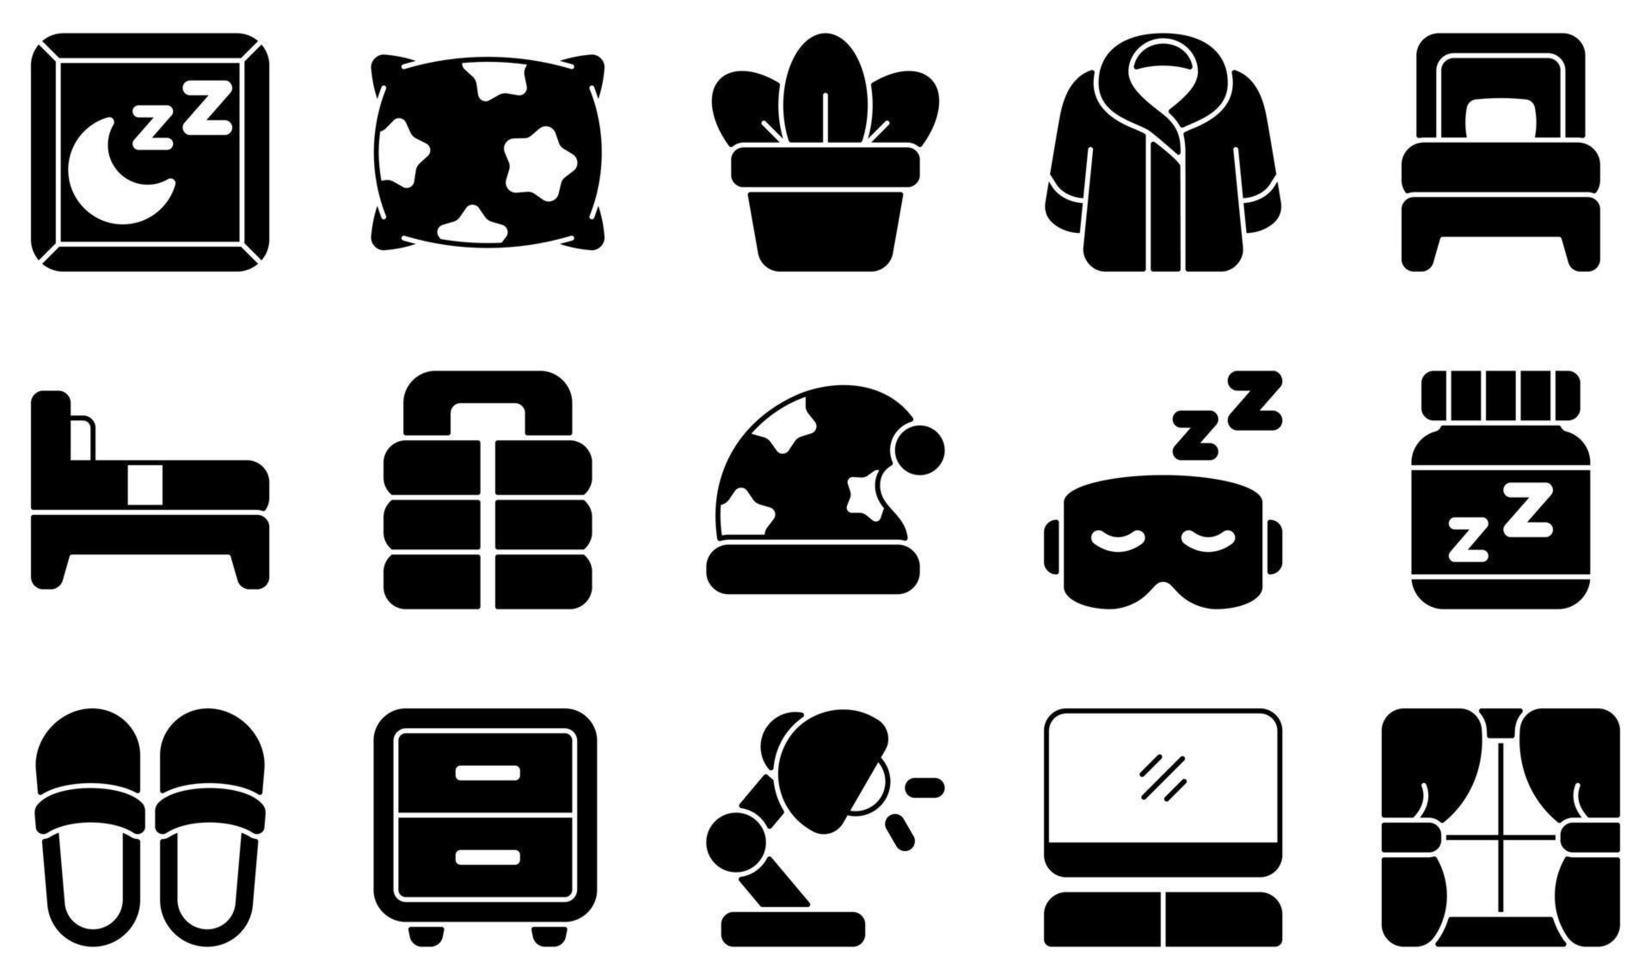 Set of Vector Icons Related to Bedroom. Contains such Icons as Pillow, Single Bed, Sleeping Bag, Slipper, Table, Television and more.